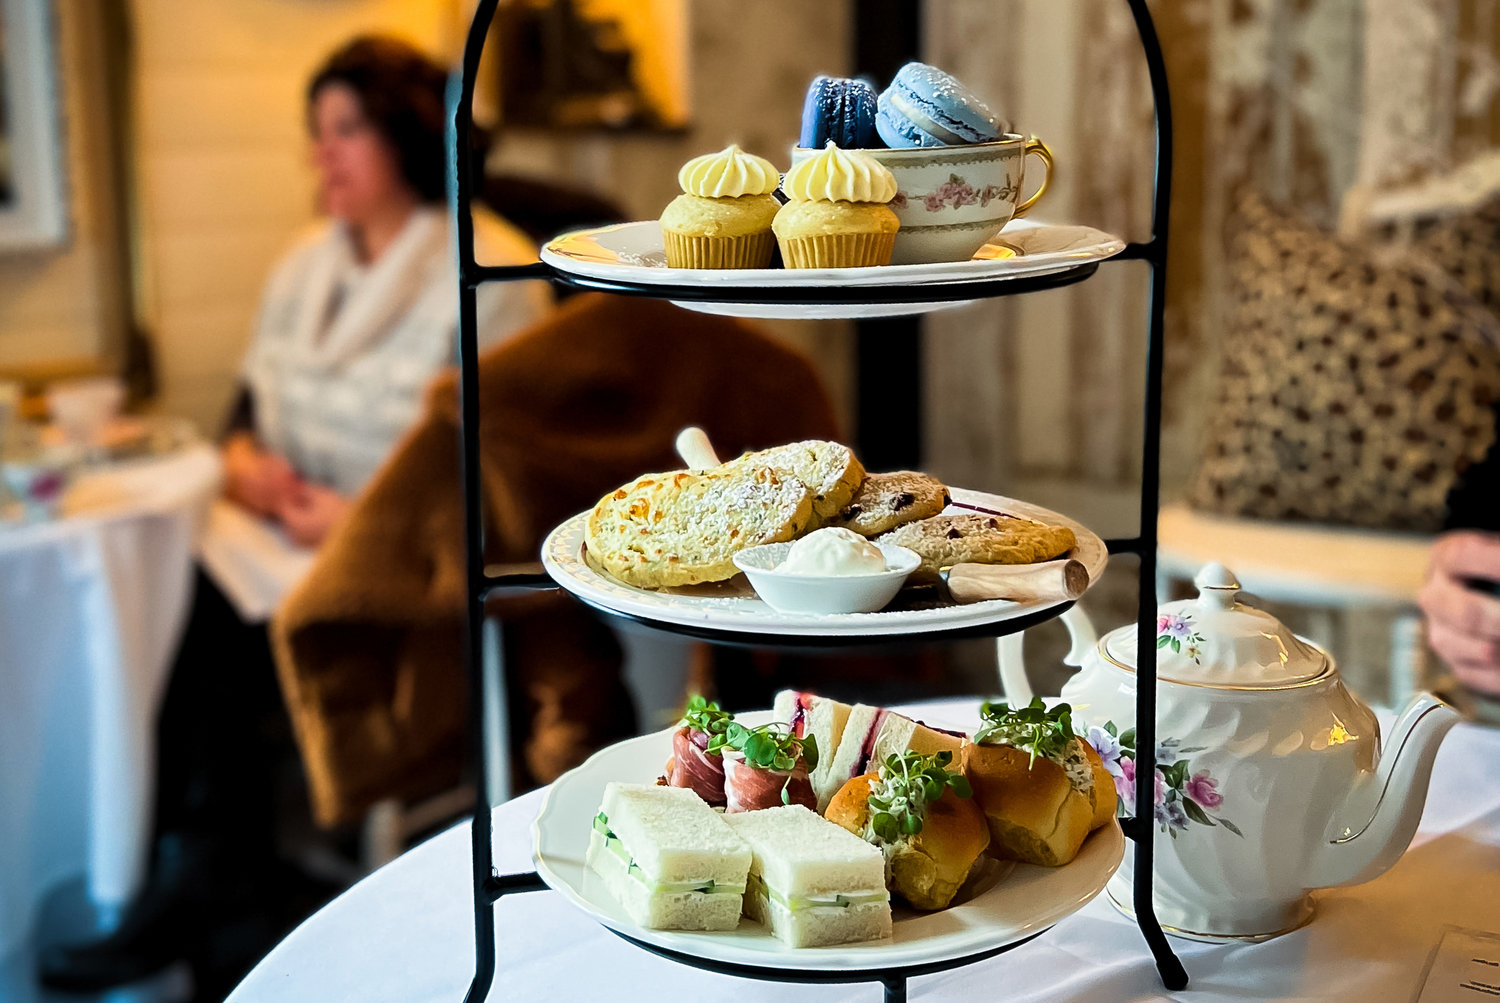 Travel to England in Wickford with tea service and light bites from Sweet Marie’s Tea Cottage